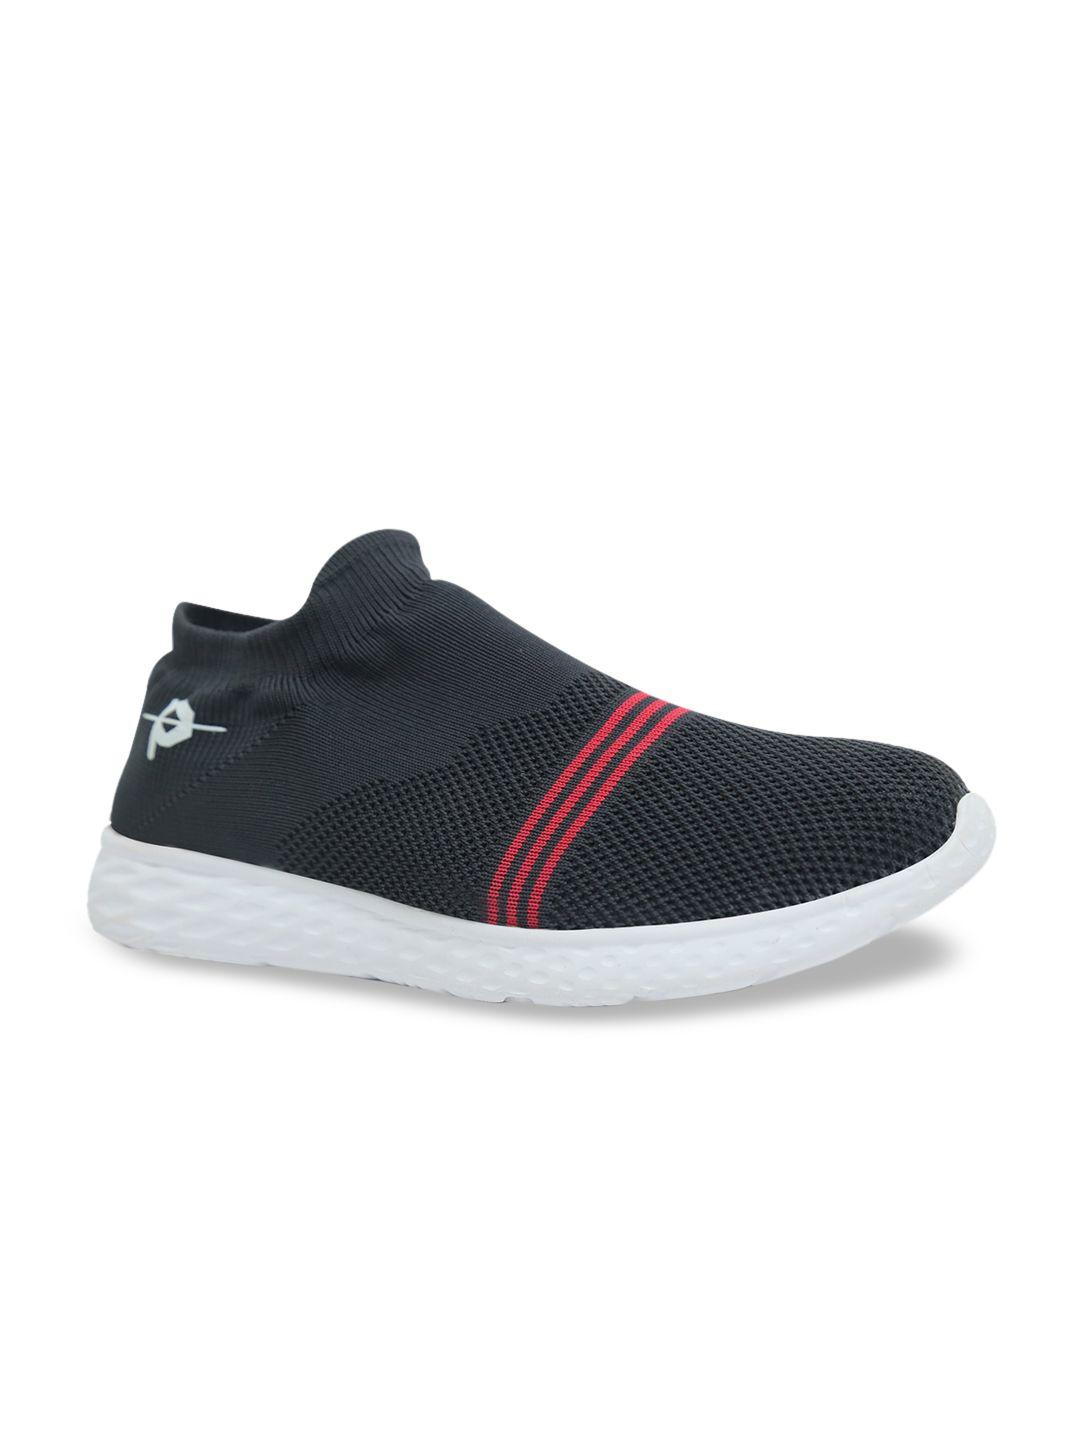 provogue men black & red striped mesh mid-top slip-on sneakers